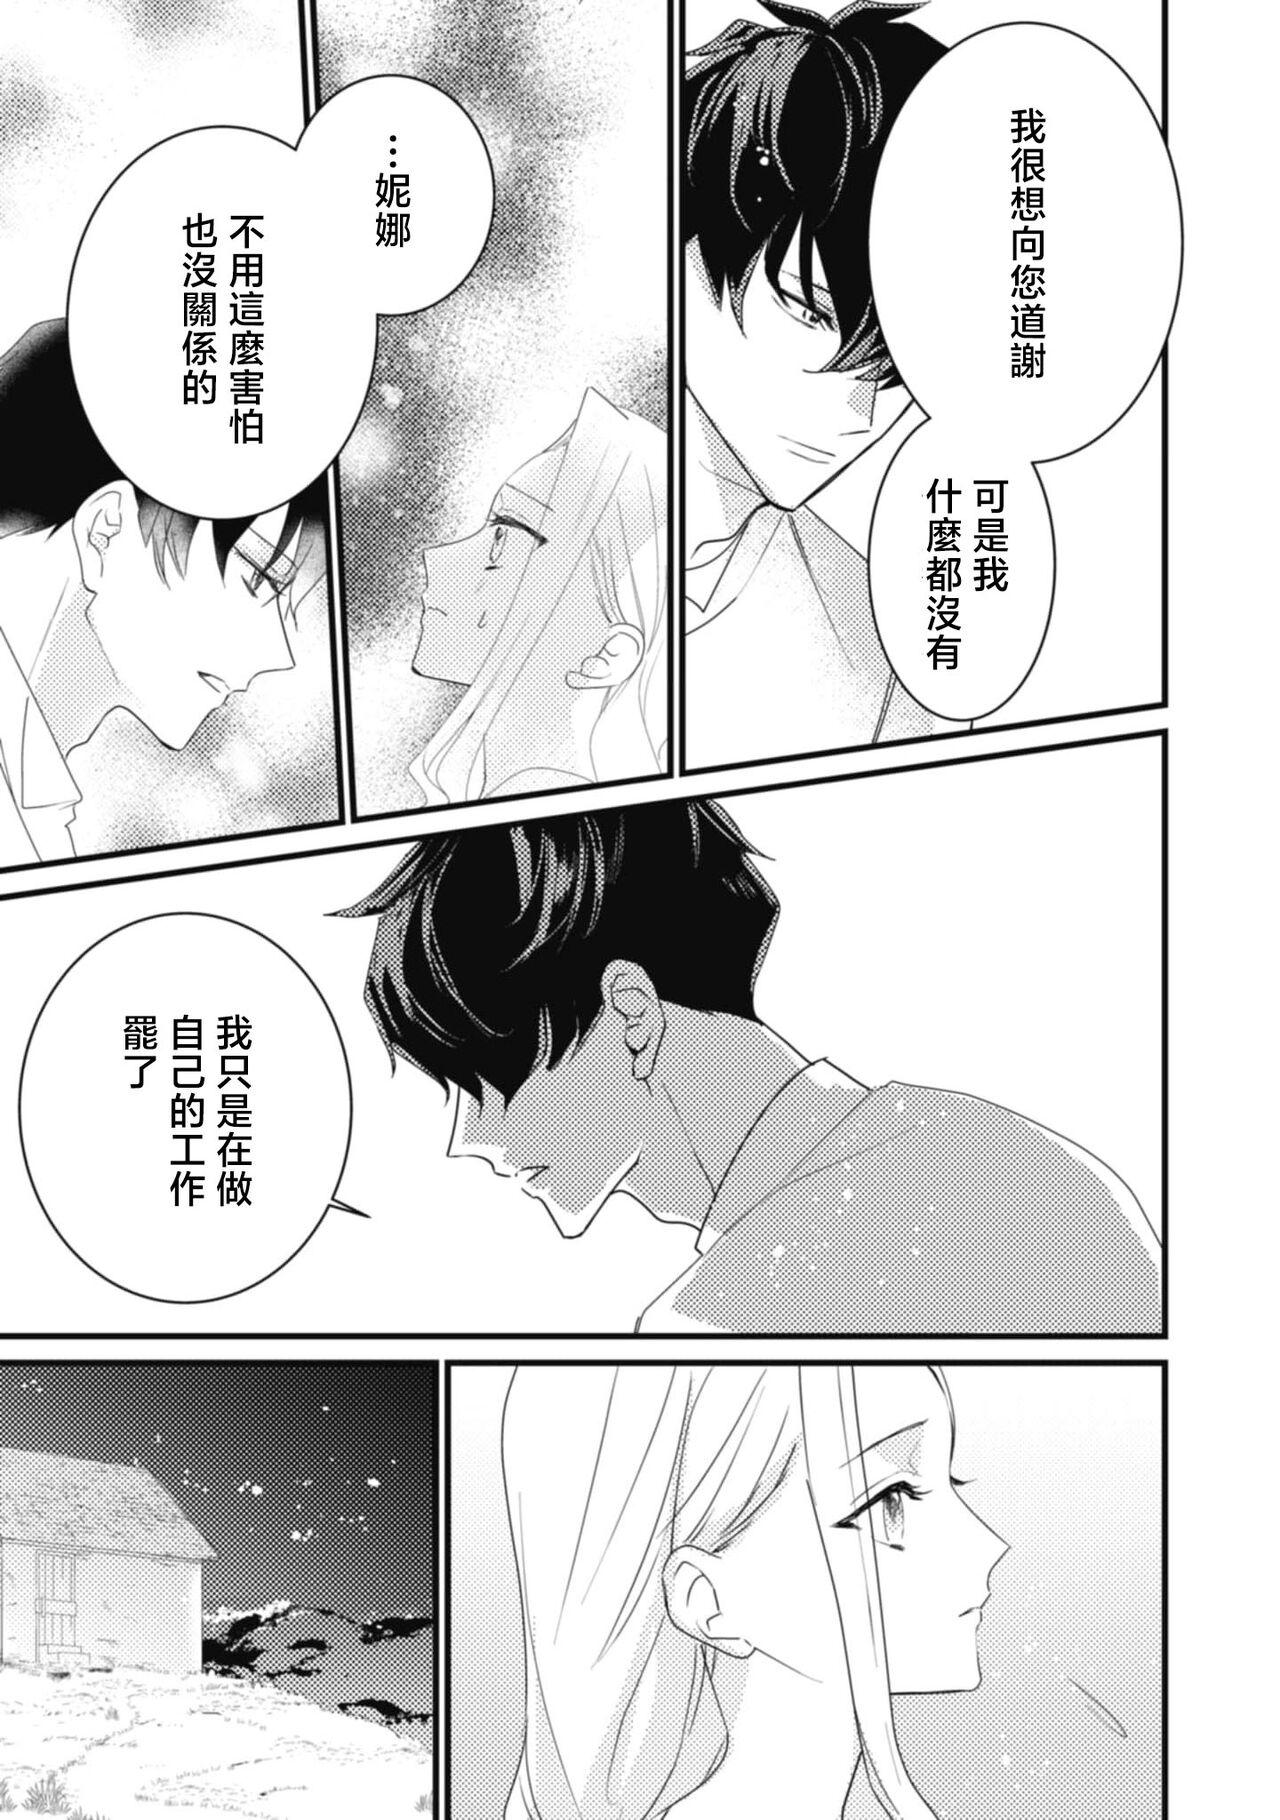 A shepherd in love with a demoted knight | 与被贬骑士相爱的牧羊女1 20